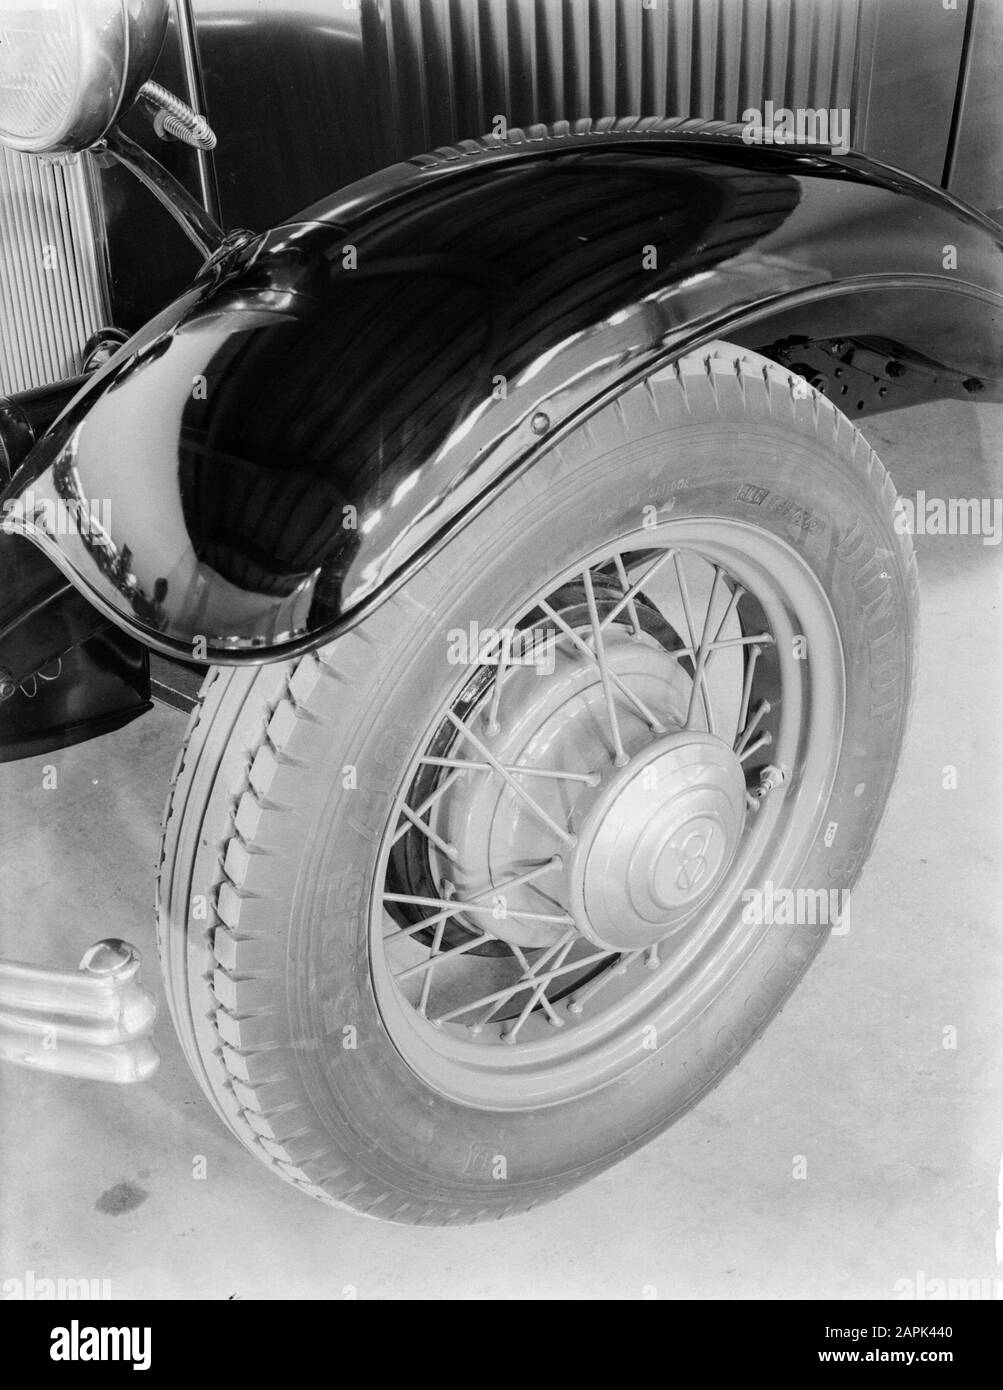 https://c8.alamy.com/comp/2APK440/ford-netherlands-description-detail-of-a-ford-car-spaakwiel-tyre-and-mudguard-date-january-1-1932-location-rotterdam-zuid-holland-keywords-cars-advertising-wheels-personal-name-ford-2APK440.jpg